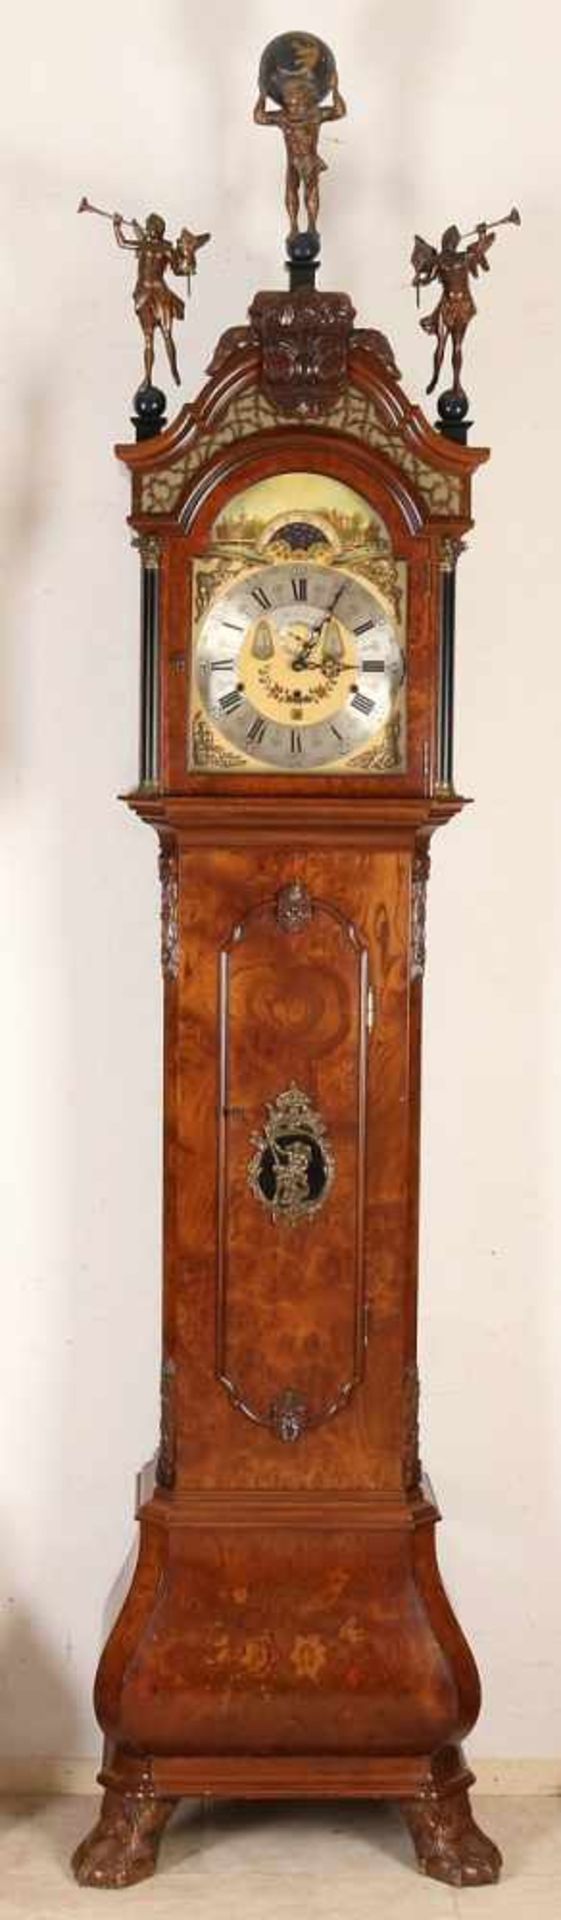 Amsterdam standing clock with walnut clock case WUBA brand. Westminster percussion, with moon phase,